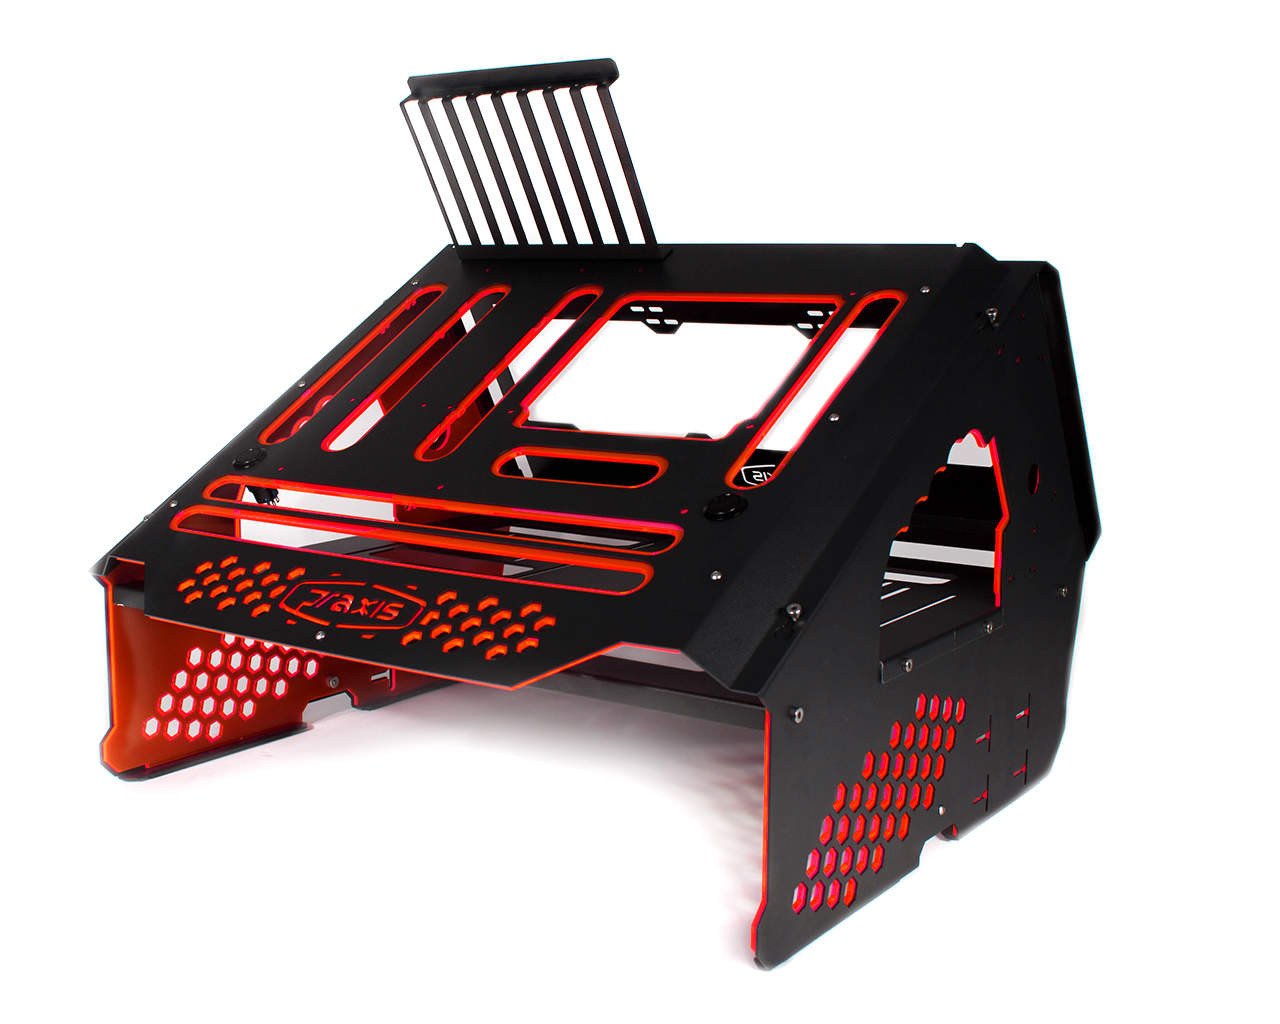 PrimoChill's Praxis Wetbench Powdercoated Steel Modular Open Air Computer Test Bench for Watercooling or Air Cooled Components - PrimoChill - KEEPING IT COOL Black w/UV Red/Pink Accents